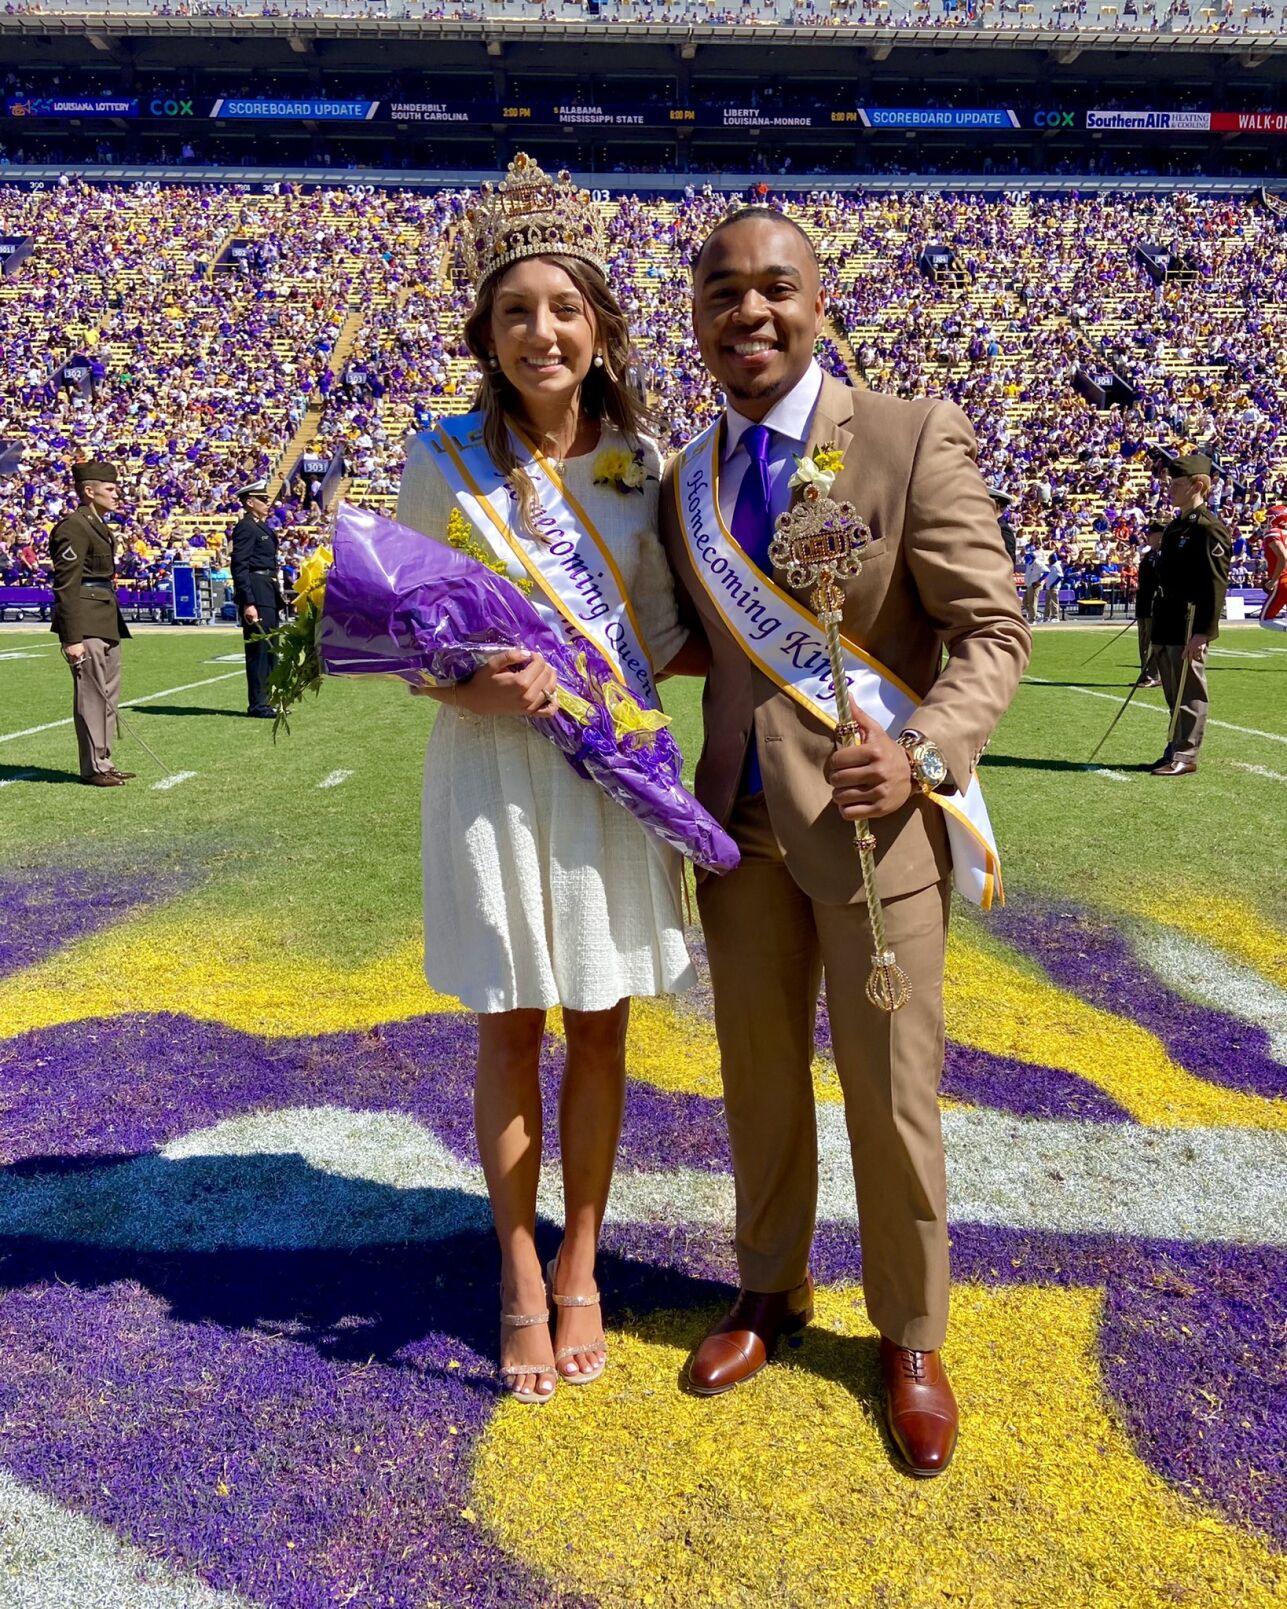 LSU announces King and Queen at halftime of Florida game